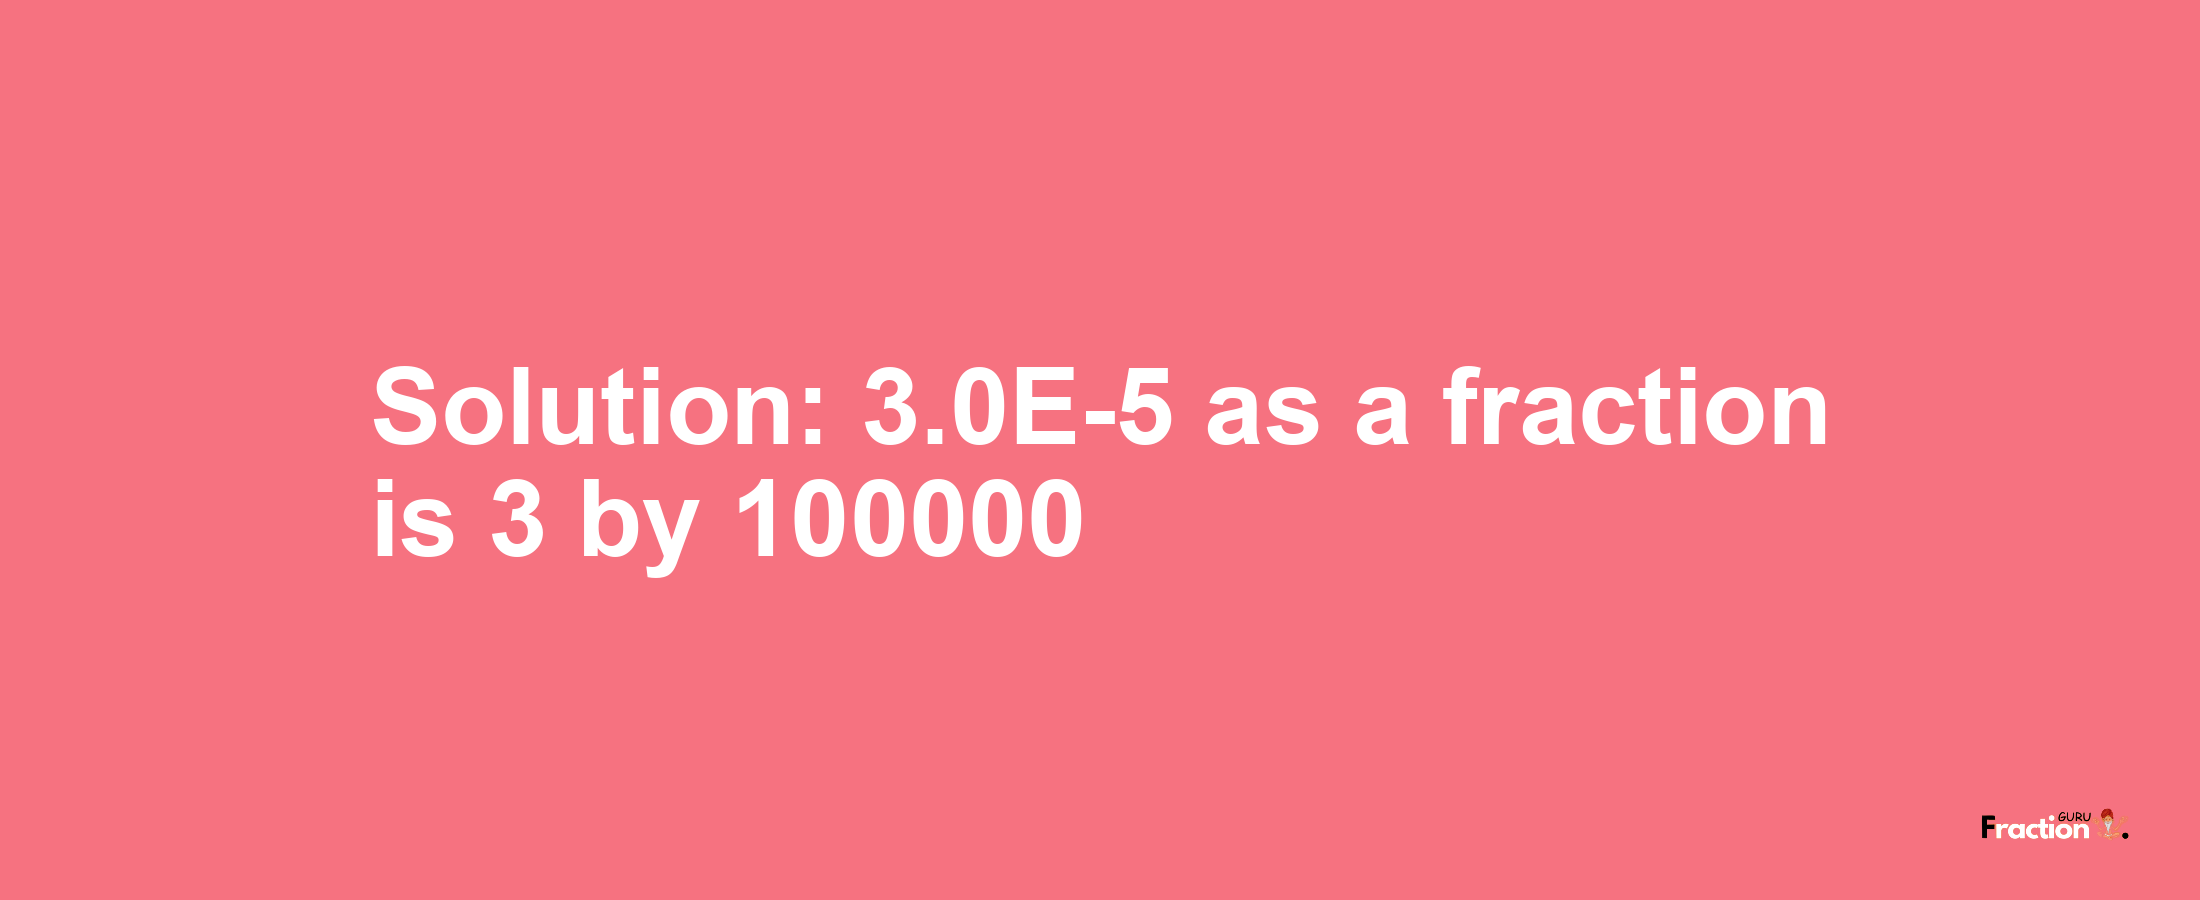 Solution:3.0E-5 as a fraction is 3/100000